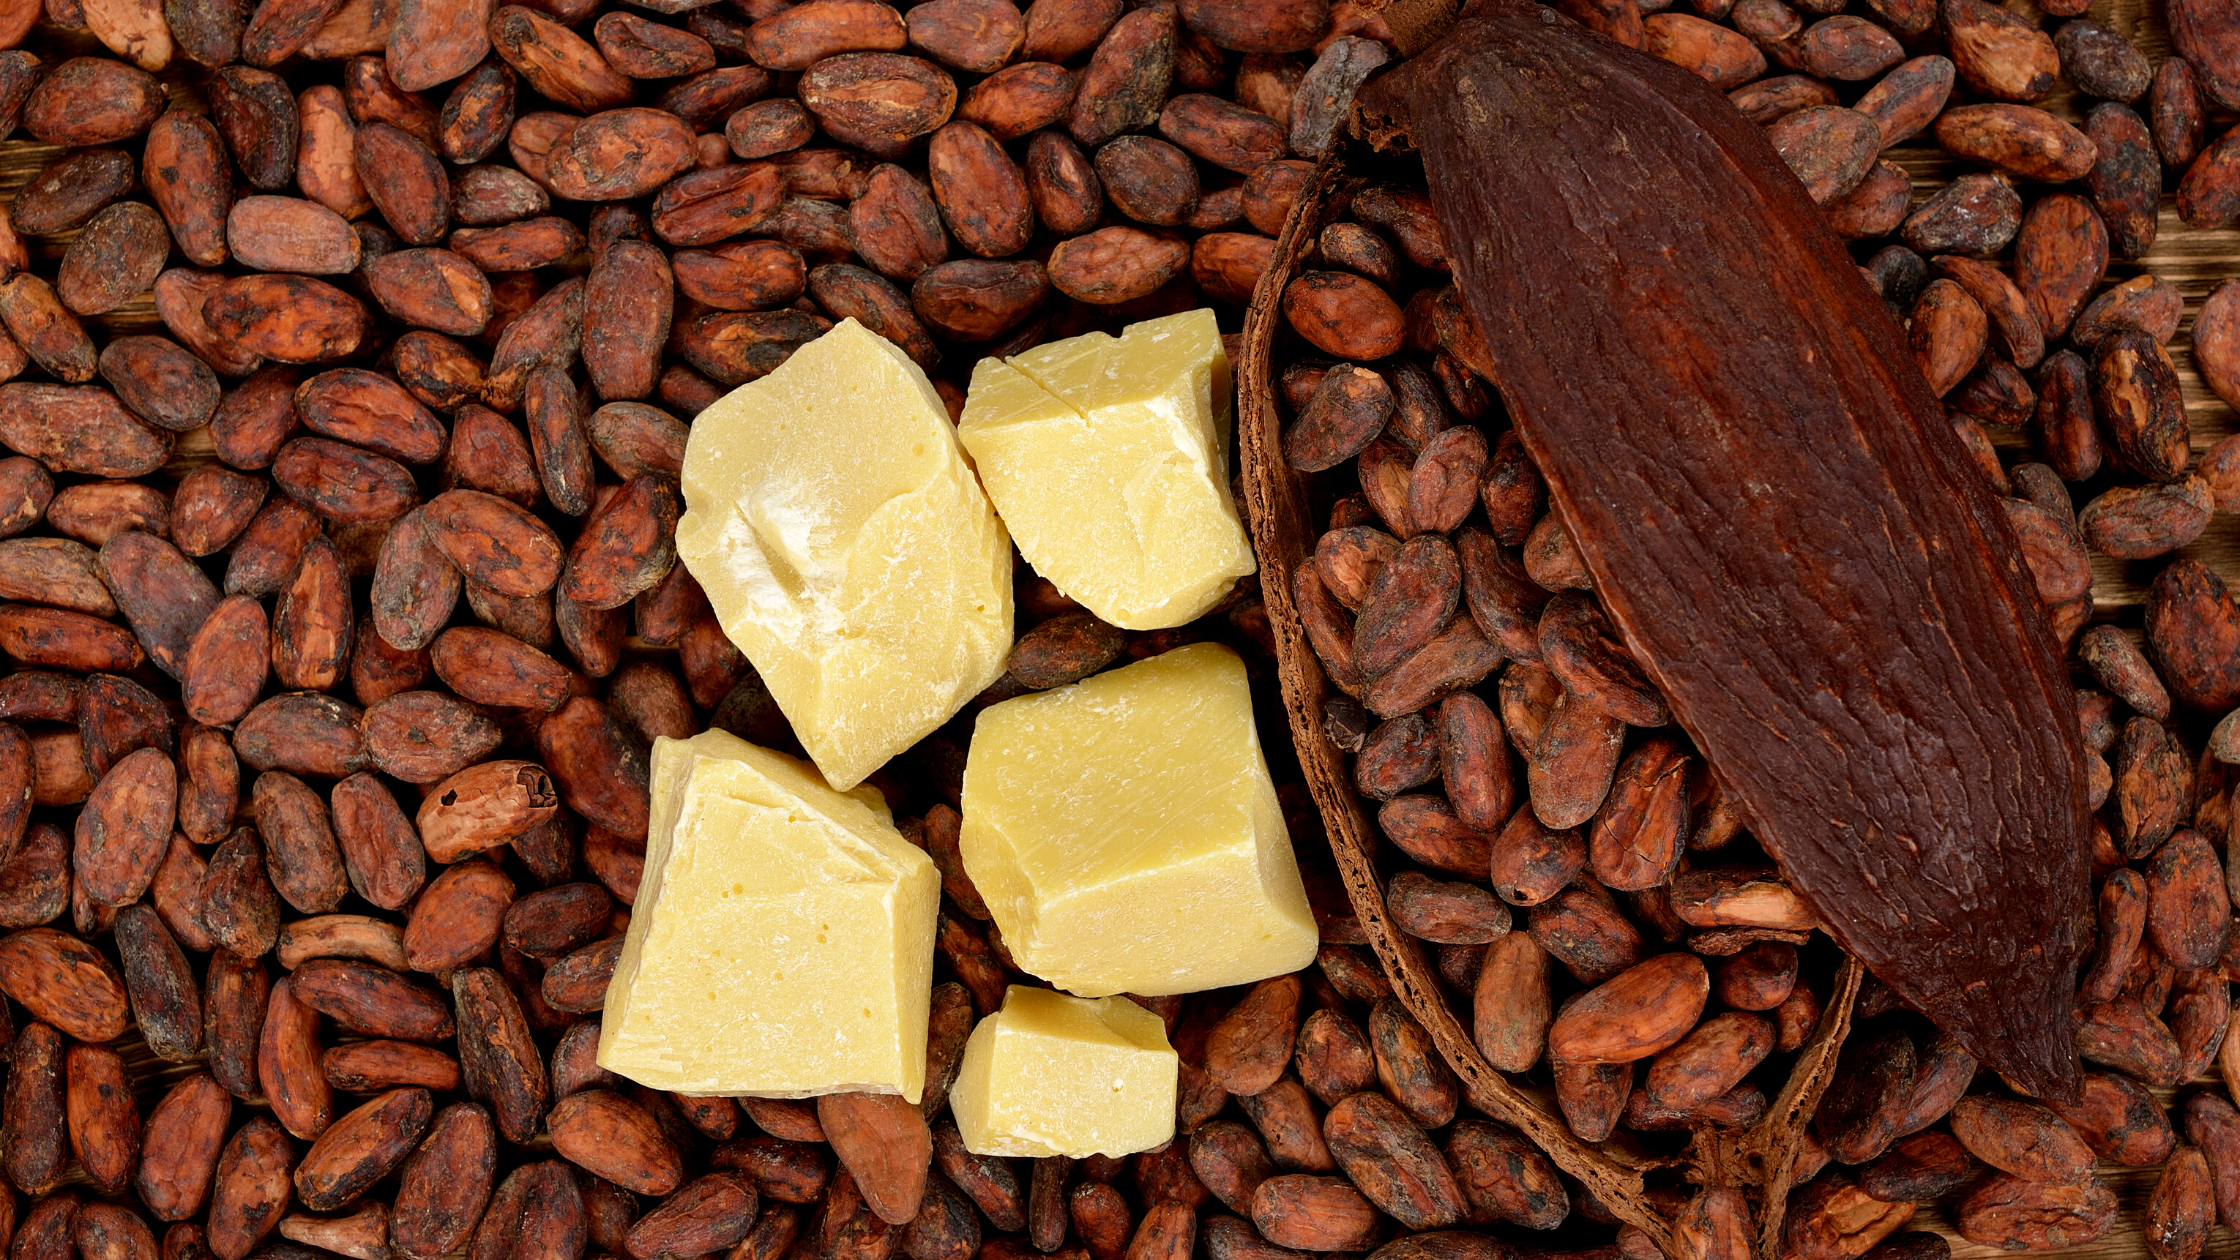 What Is Cacao Butter And Why Is It So Popular?